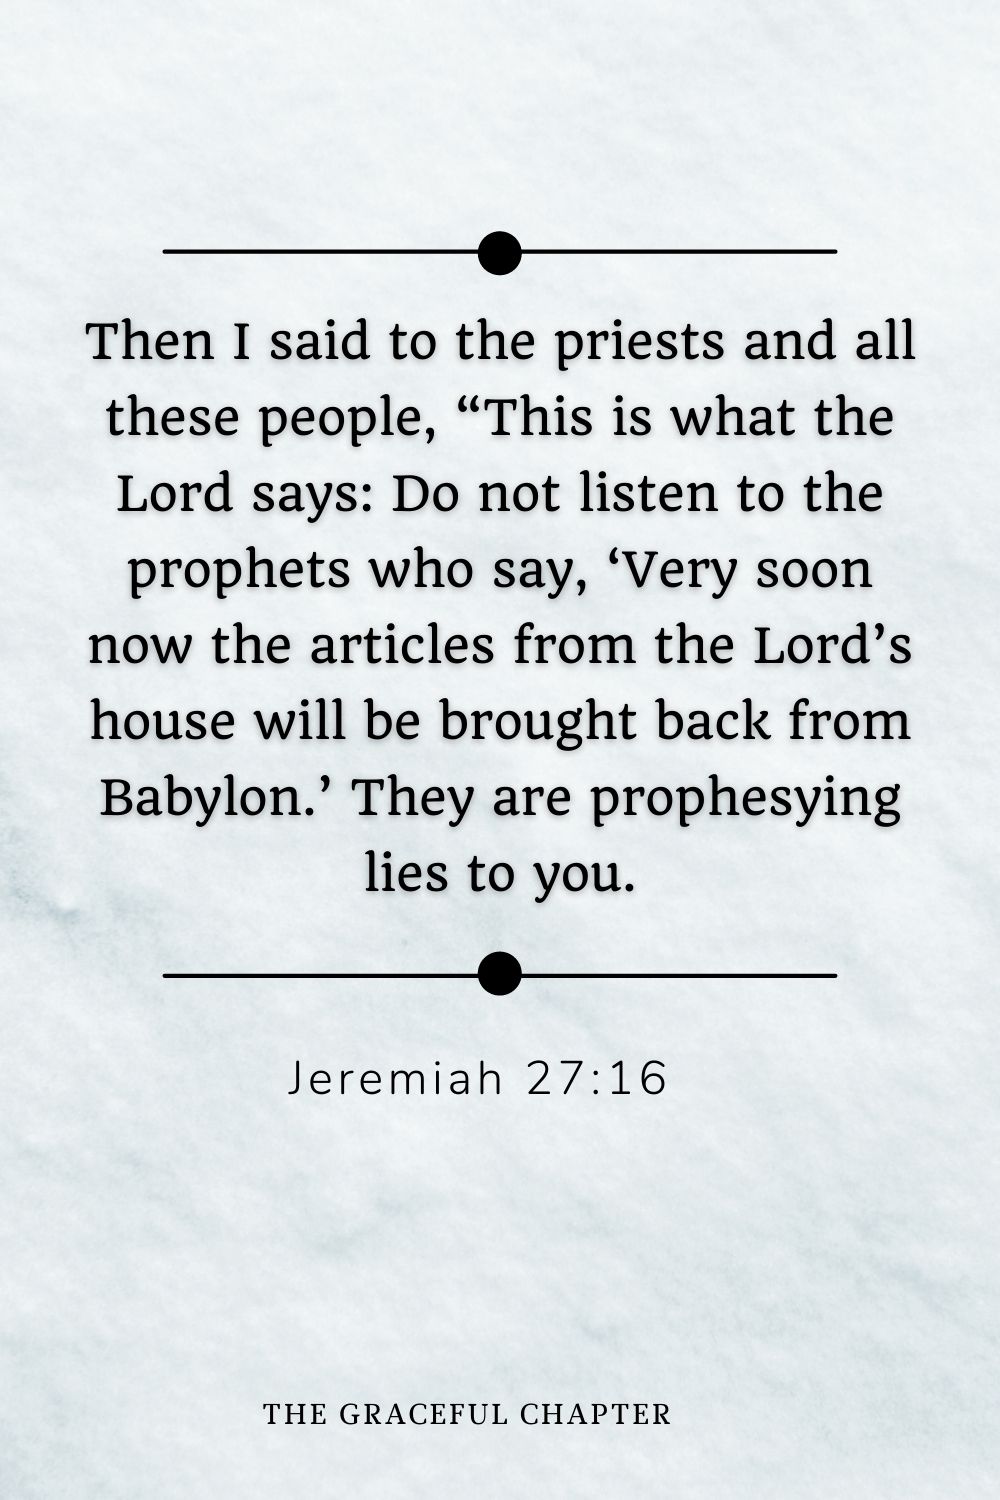 Then I said to the priests and all these people, “This is what the Lord says: Do not listen to the prophets who say, ‘Very soon now the articles from the Lord’s house will be brought back from Babylon.’ They are prophesying lies to you. Jeremiah 27:16